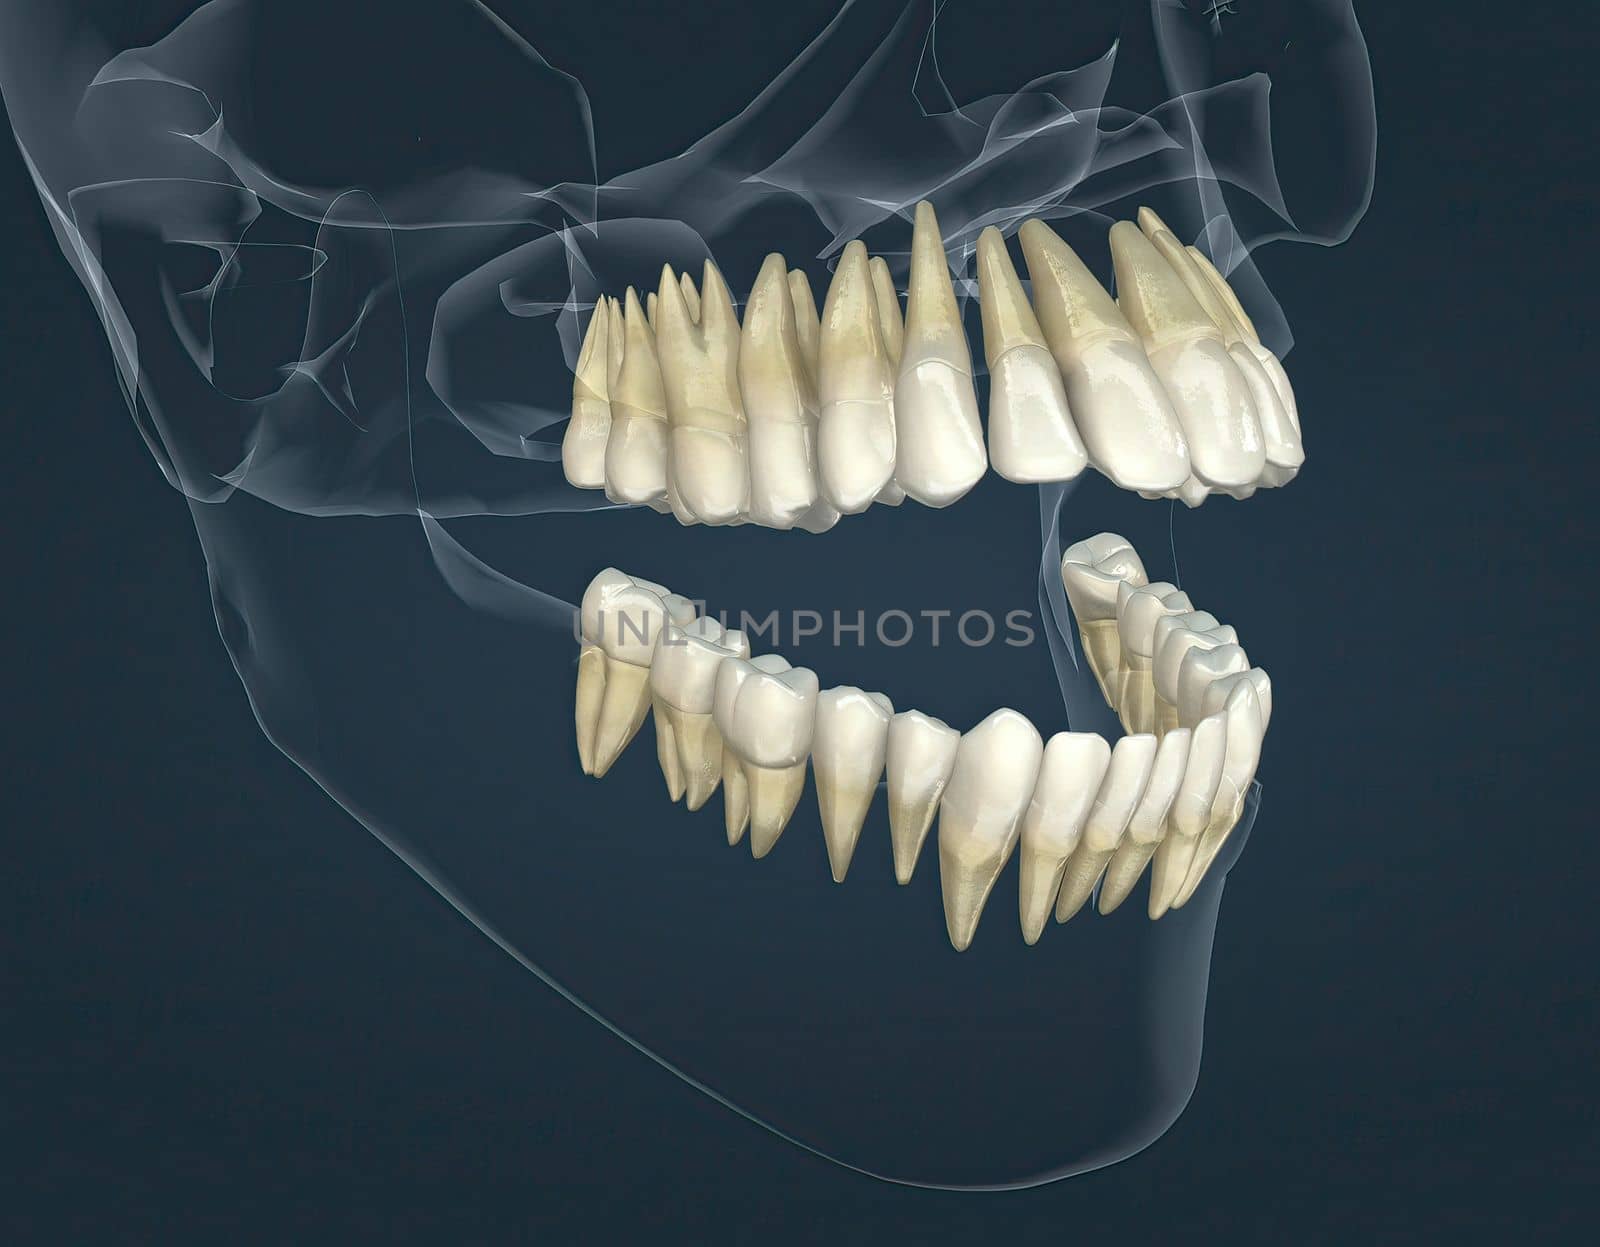 Full anatomy upper and lower teeth by creativepic